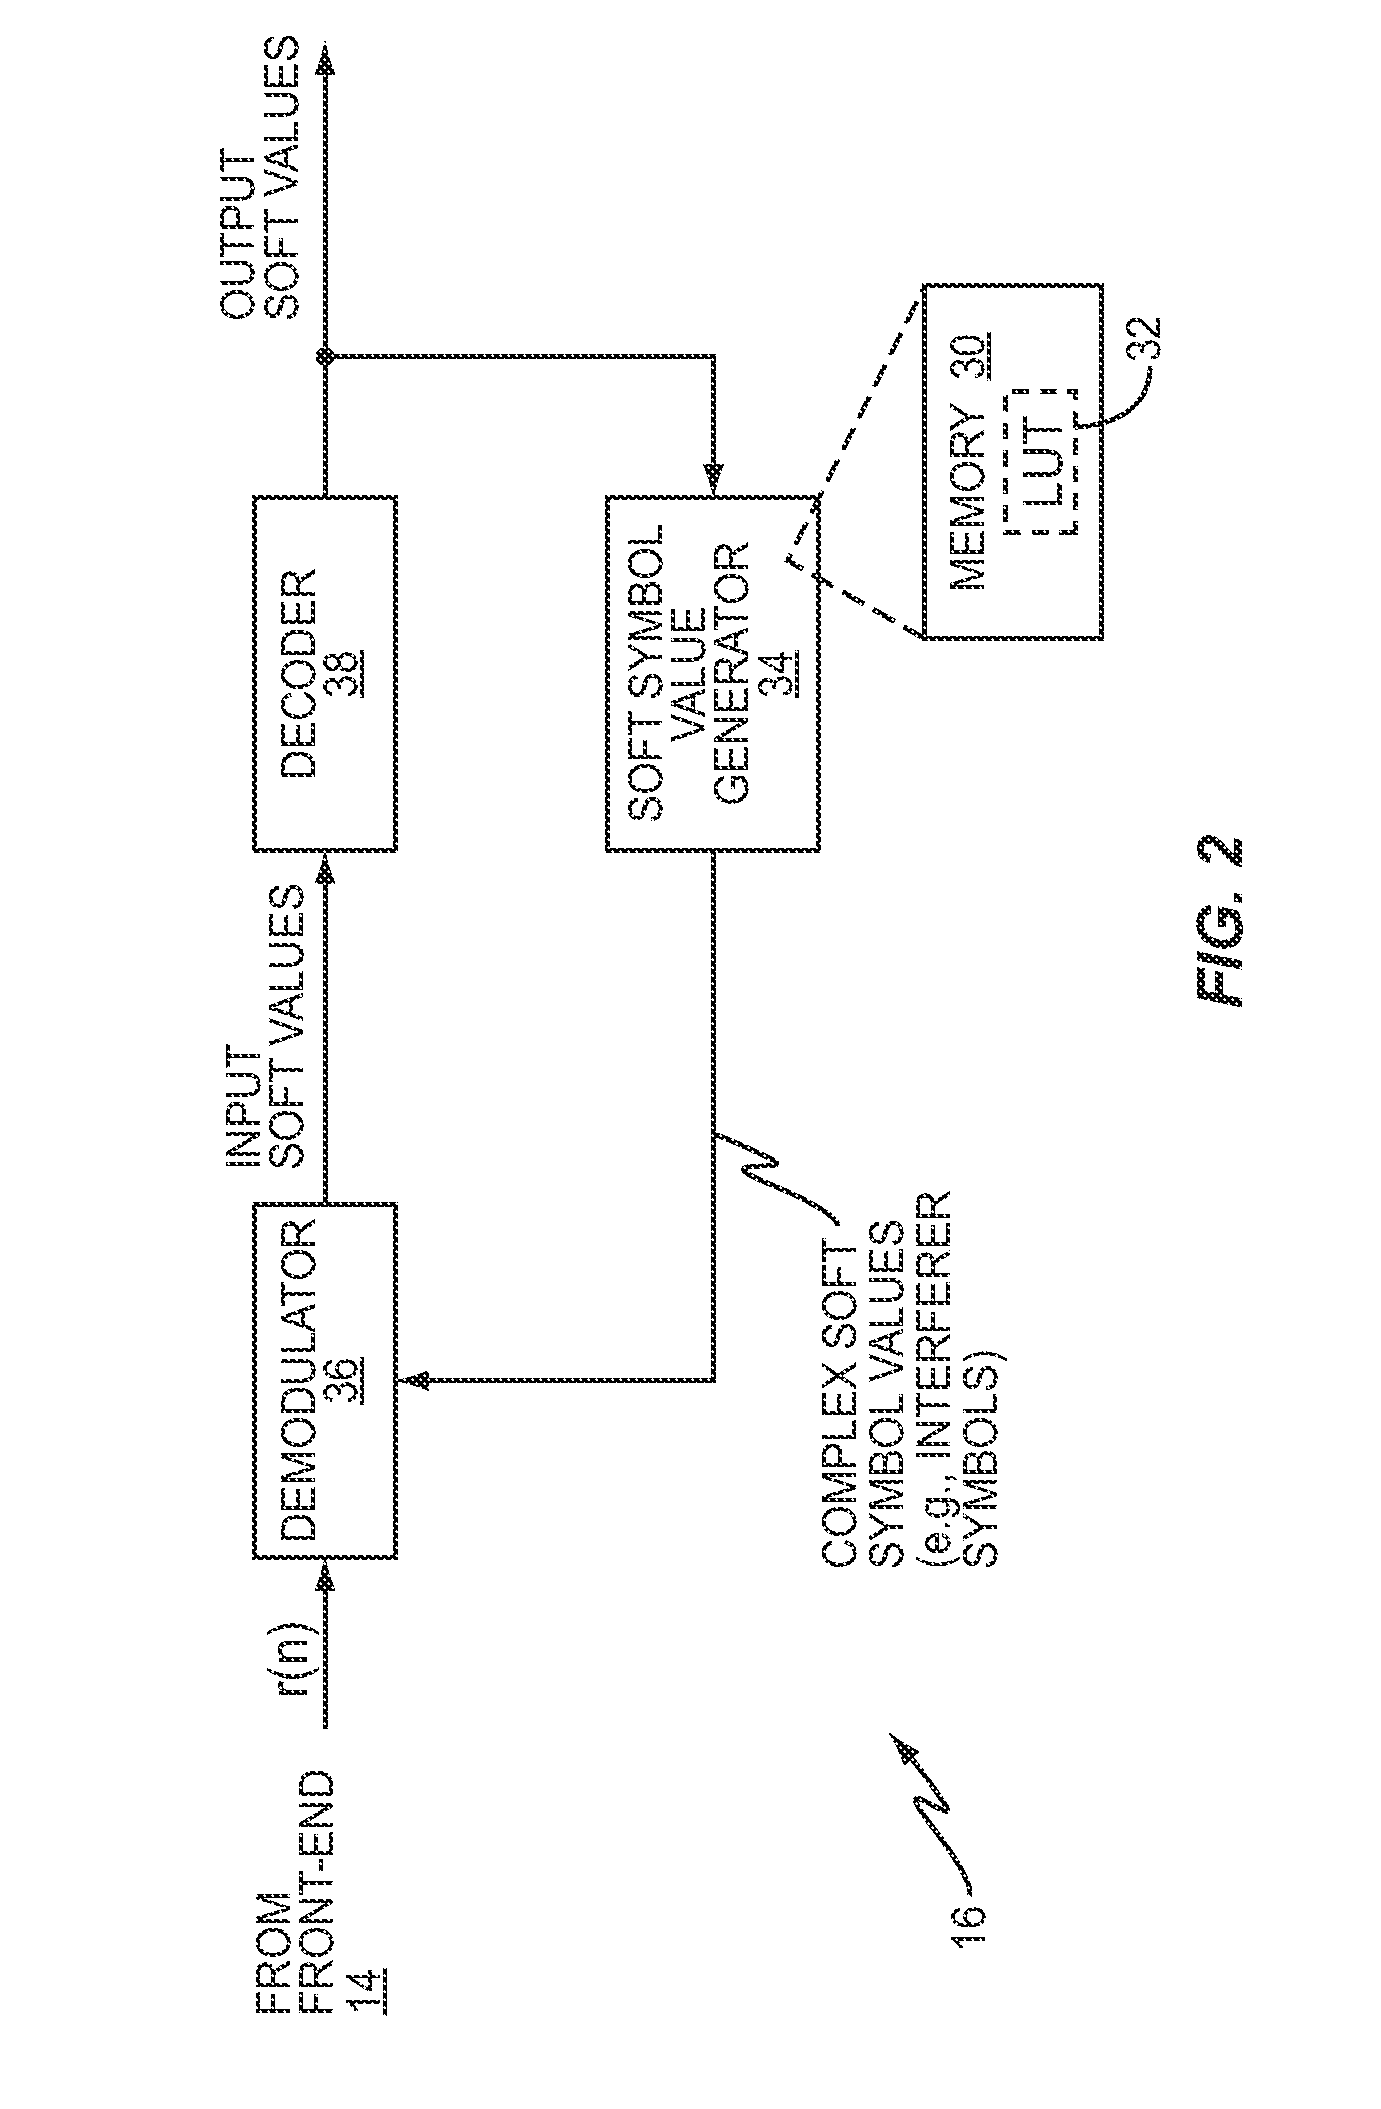 Method and Apparatus for Efficient Soft Modulation for Gray-Mapped QAM Symbols